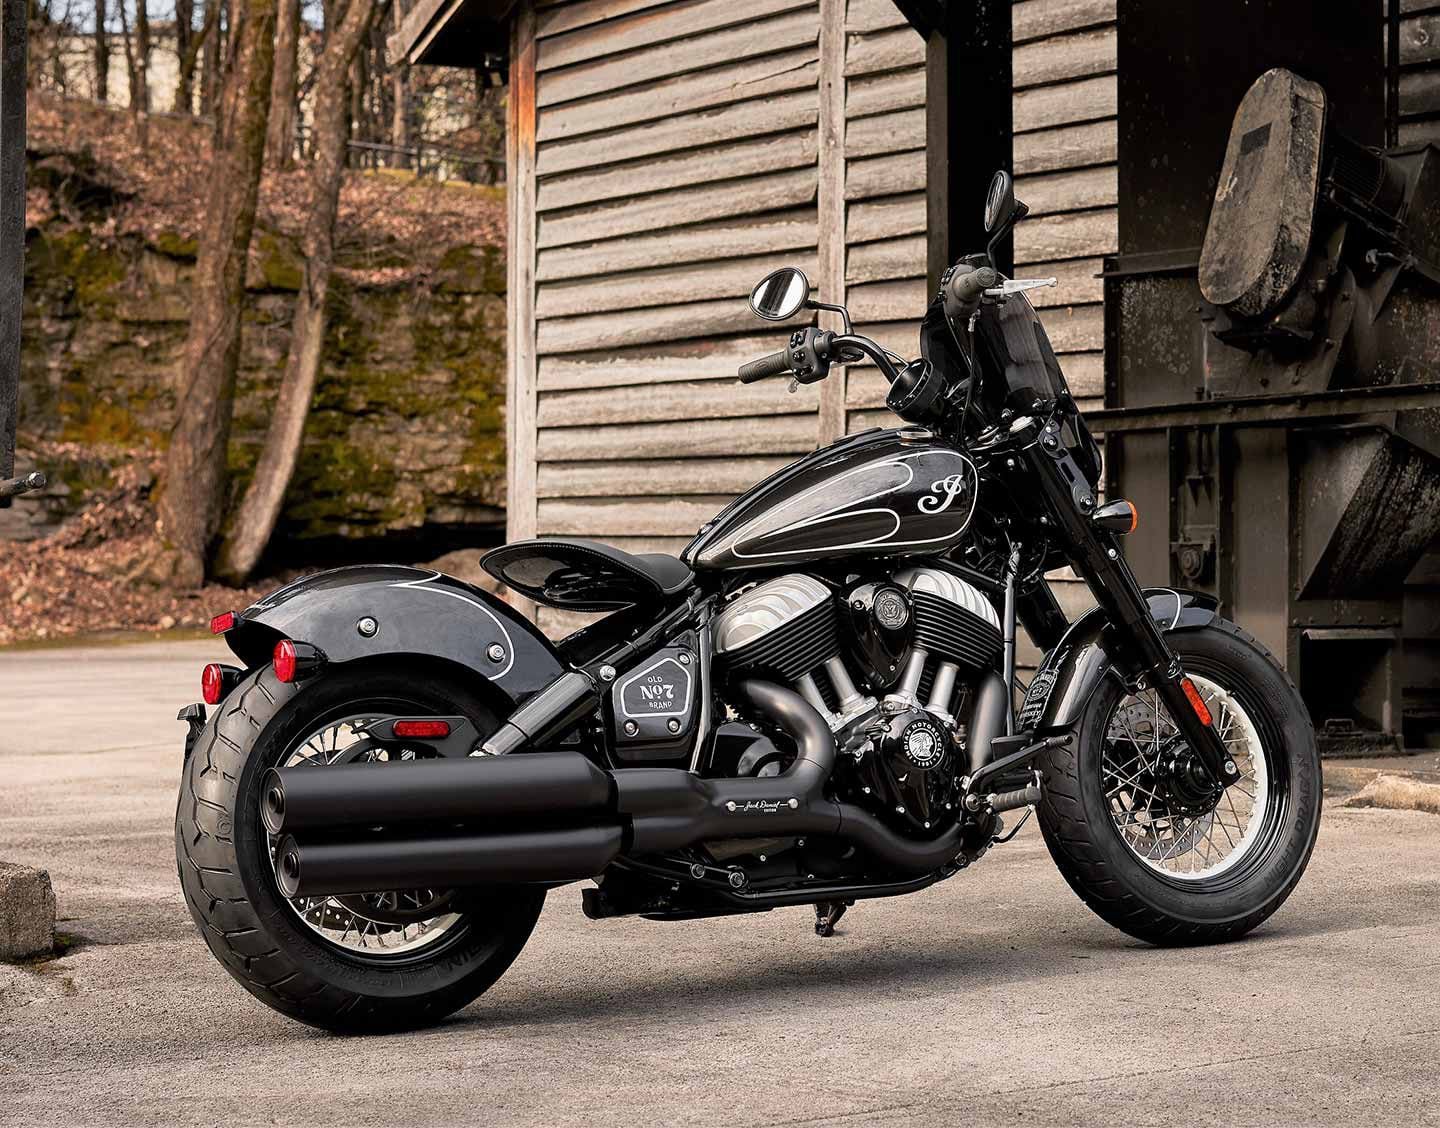 The special edition draws inspiration from Jack Daniel’s Old No. 7 Tennessee Whiskey, even going so far as to mix that whiskey directly into the bike’s Super Graphite Metallic paint.